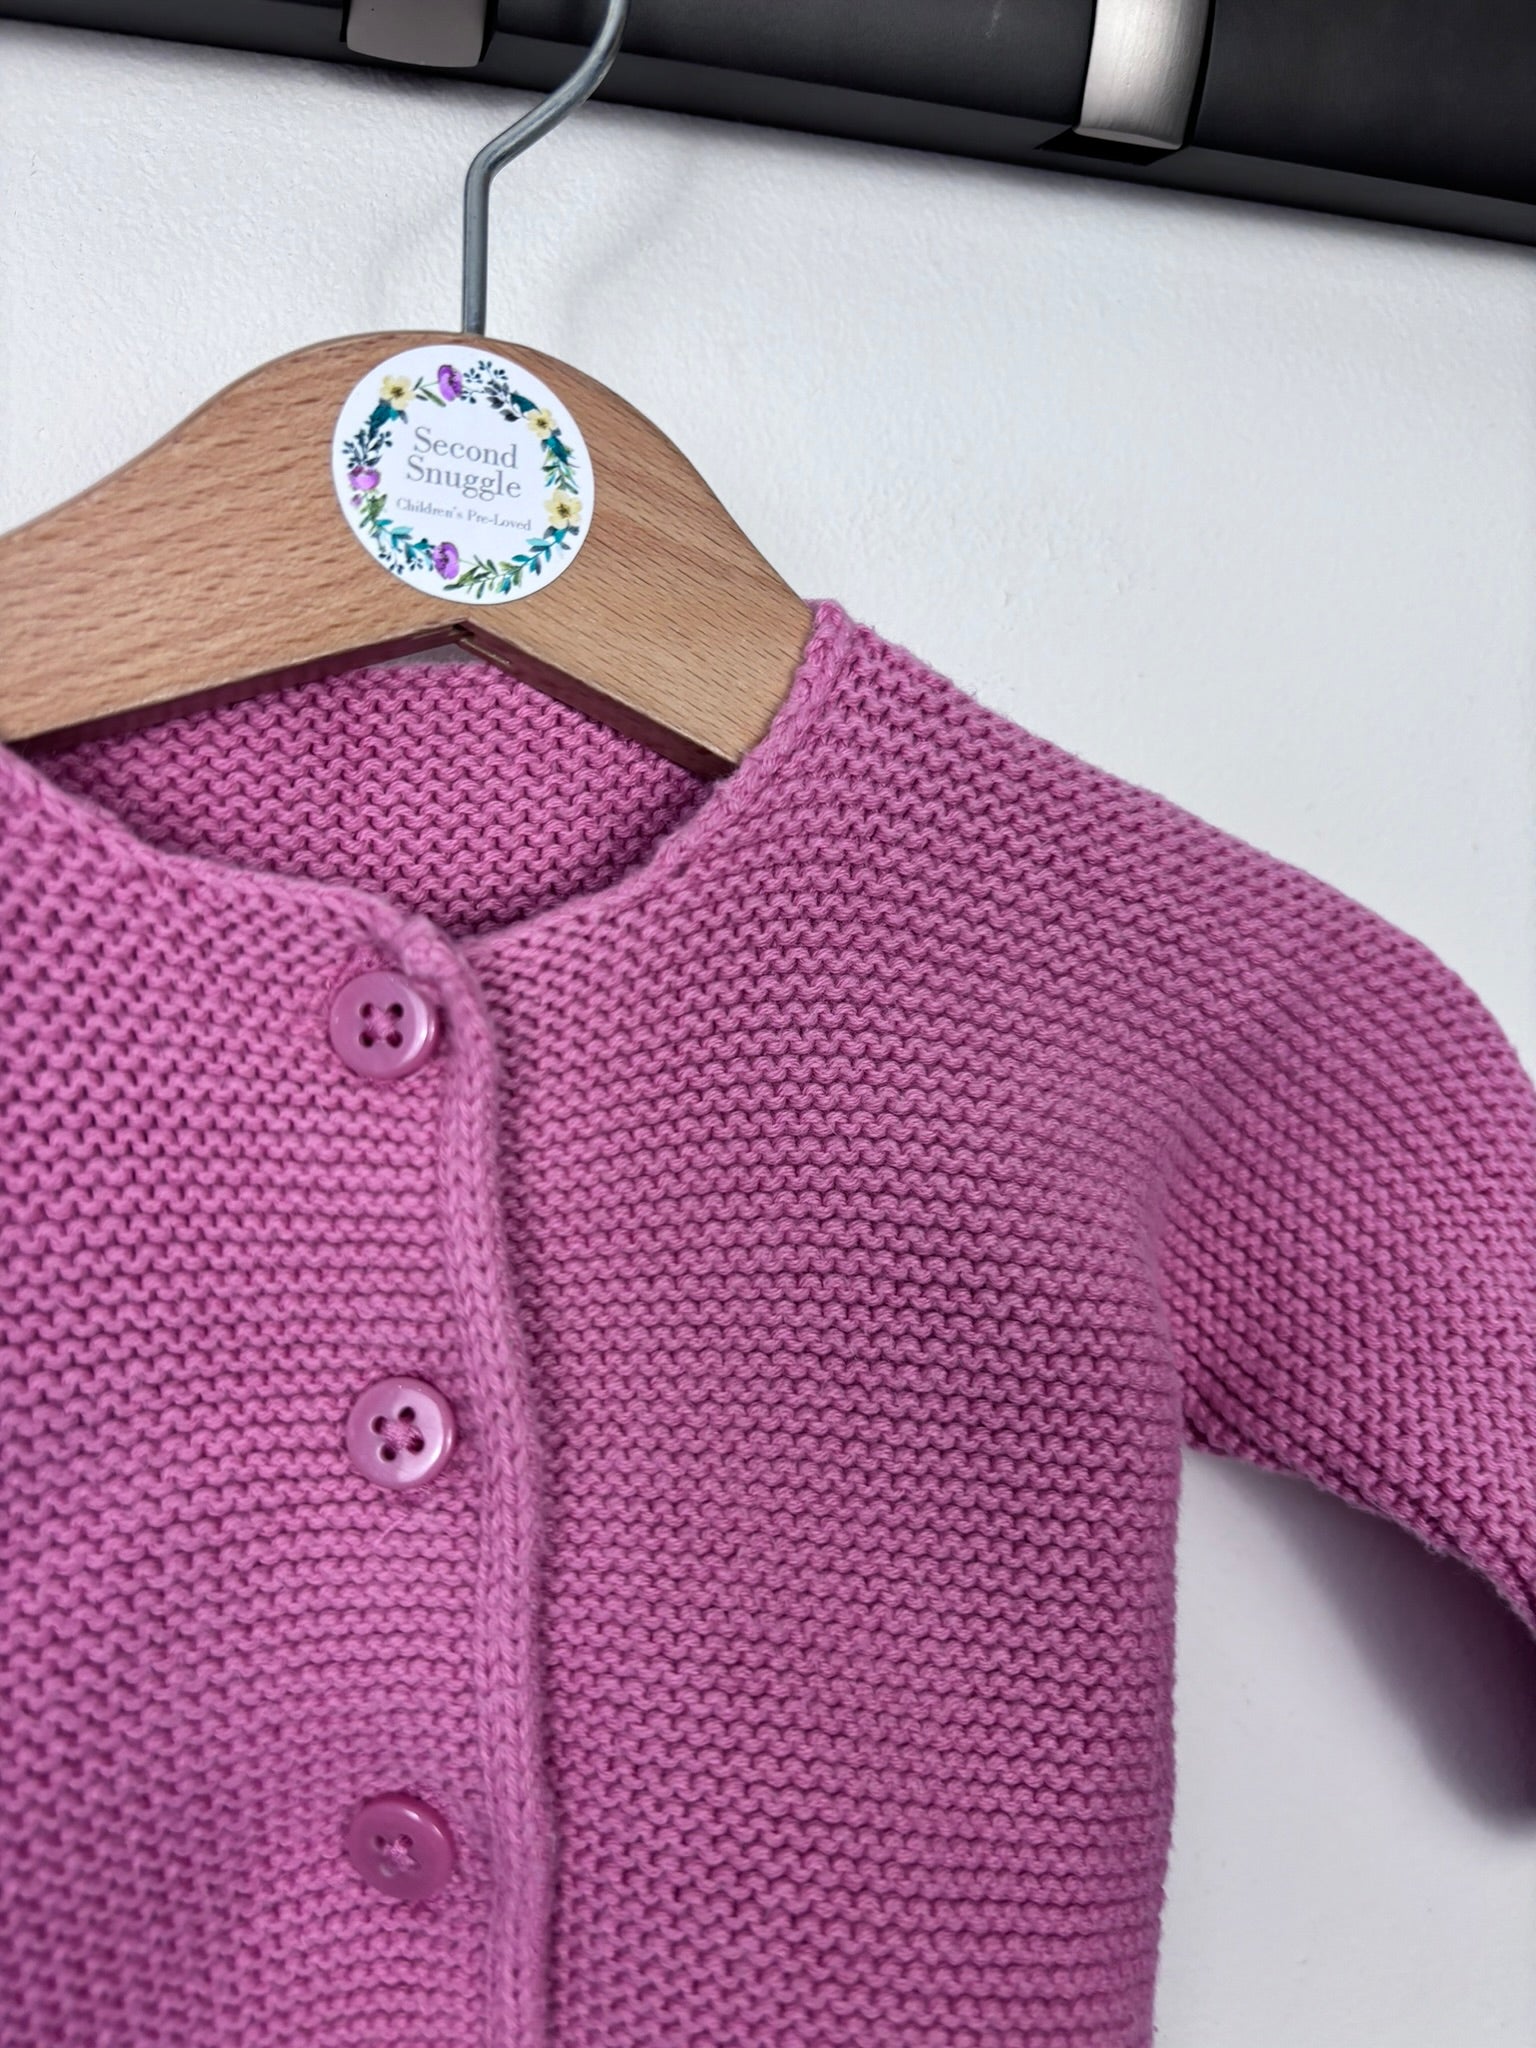 M&S Up To 1 Month-Cardigans-Second Snuggle Preloved